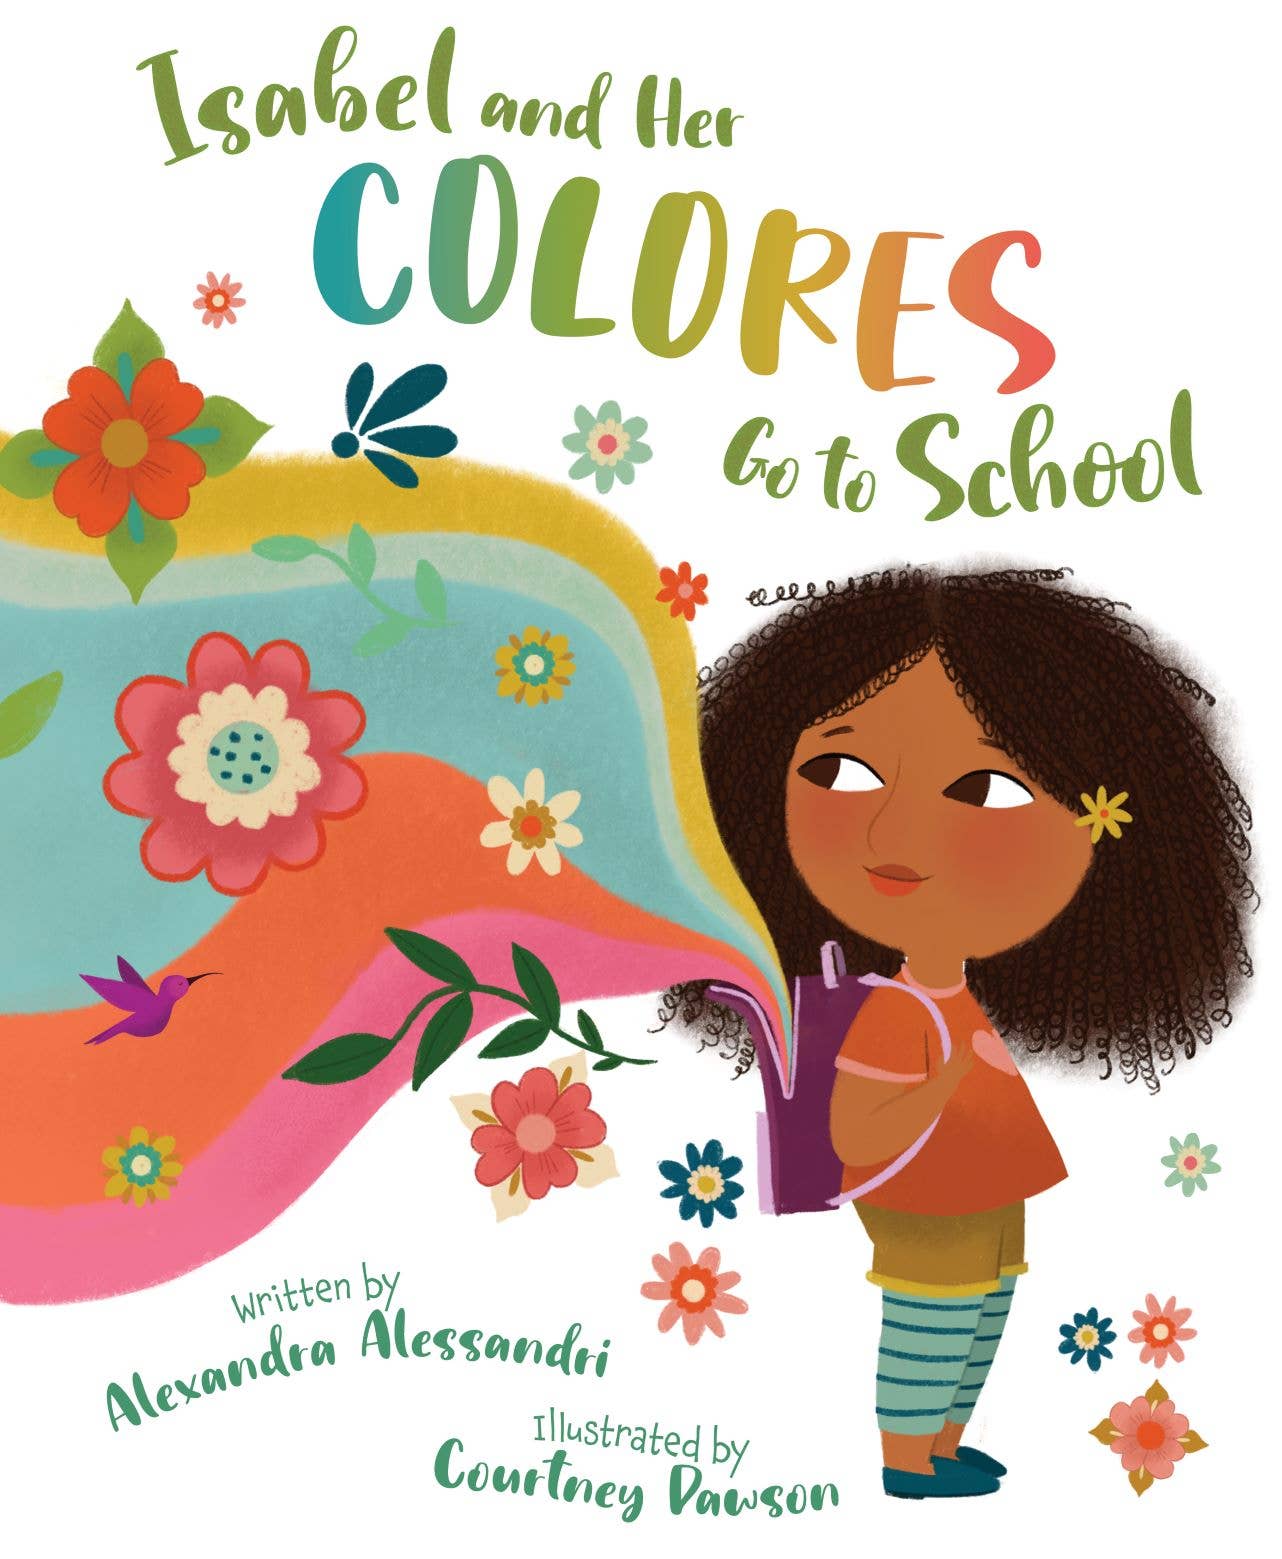 Isabel and Her Colores Go to School by Alexandra Alessandri (Hardcover)